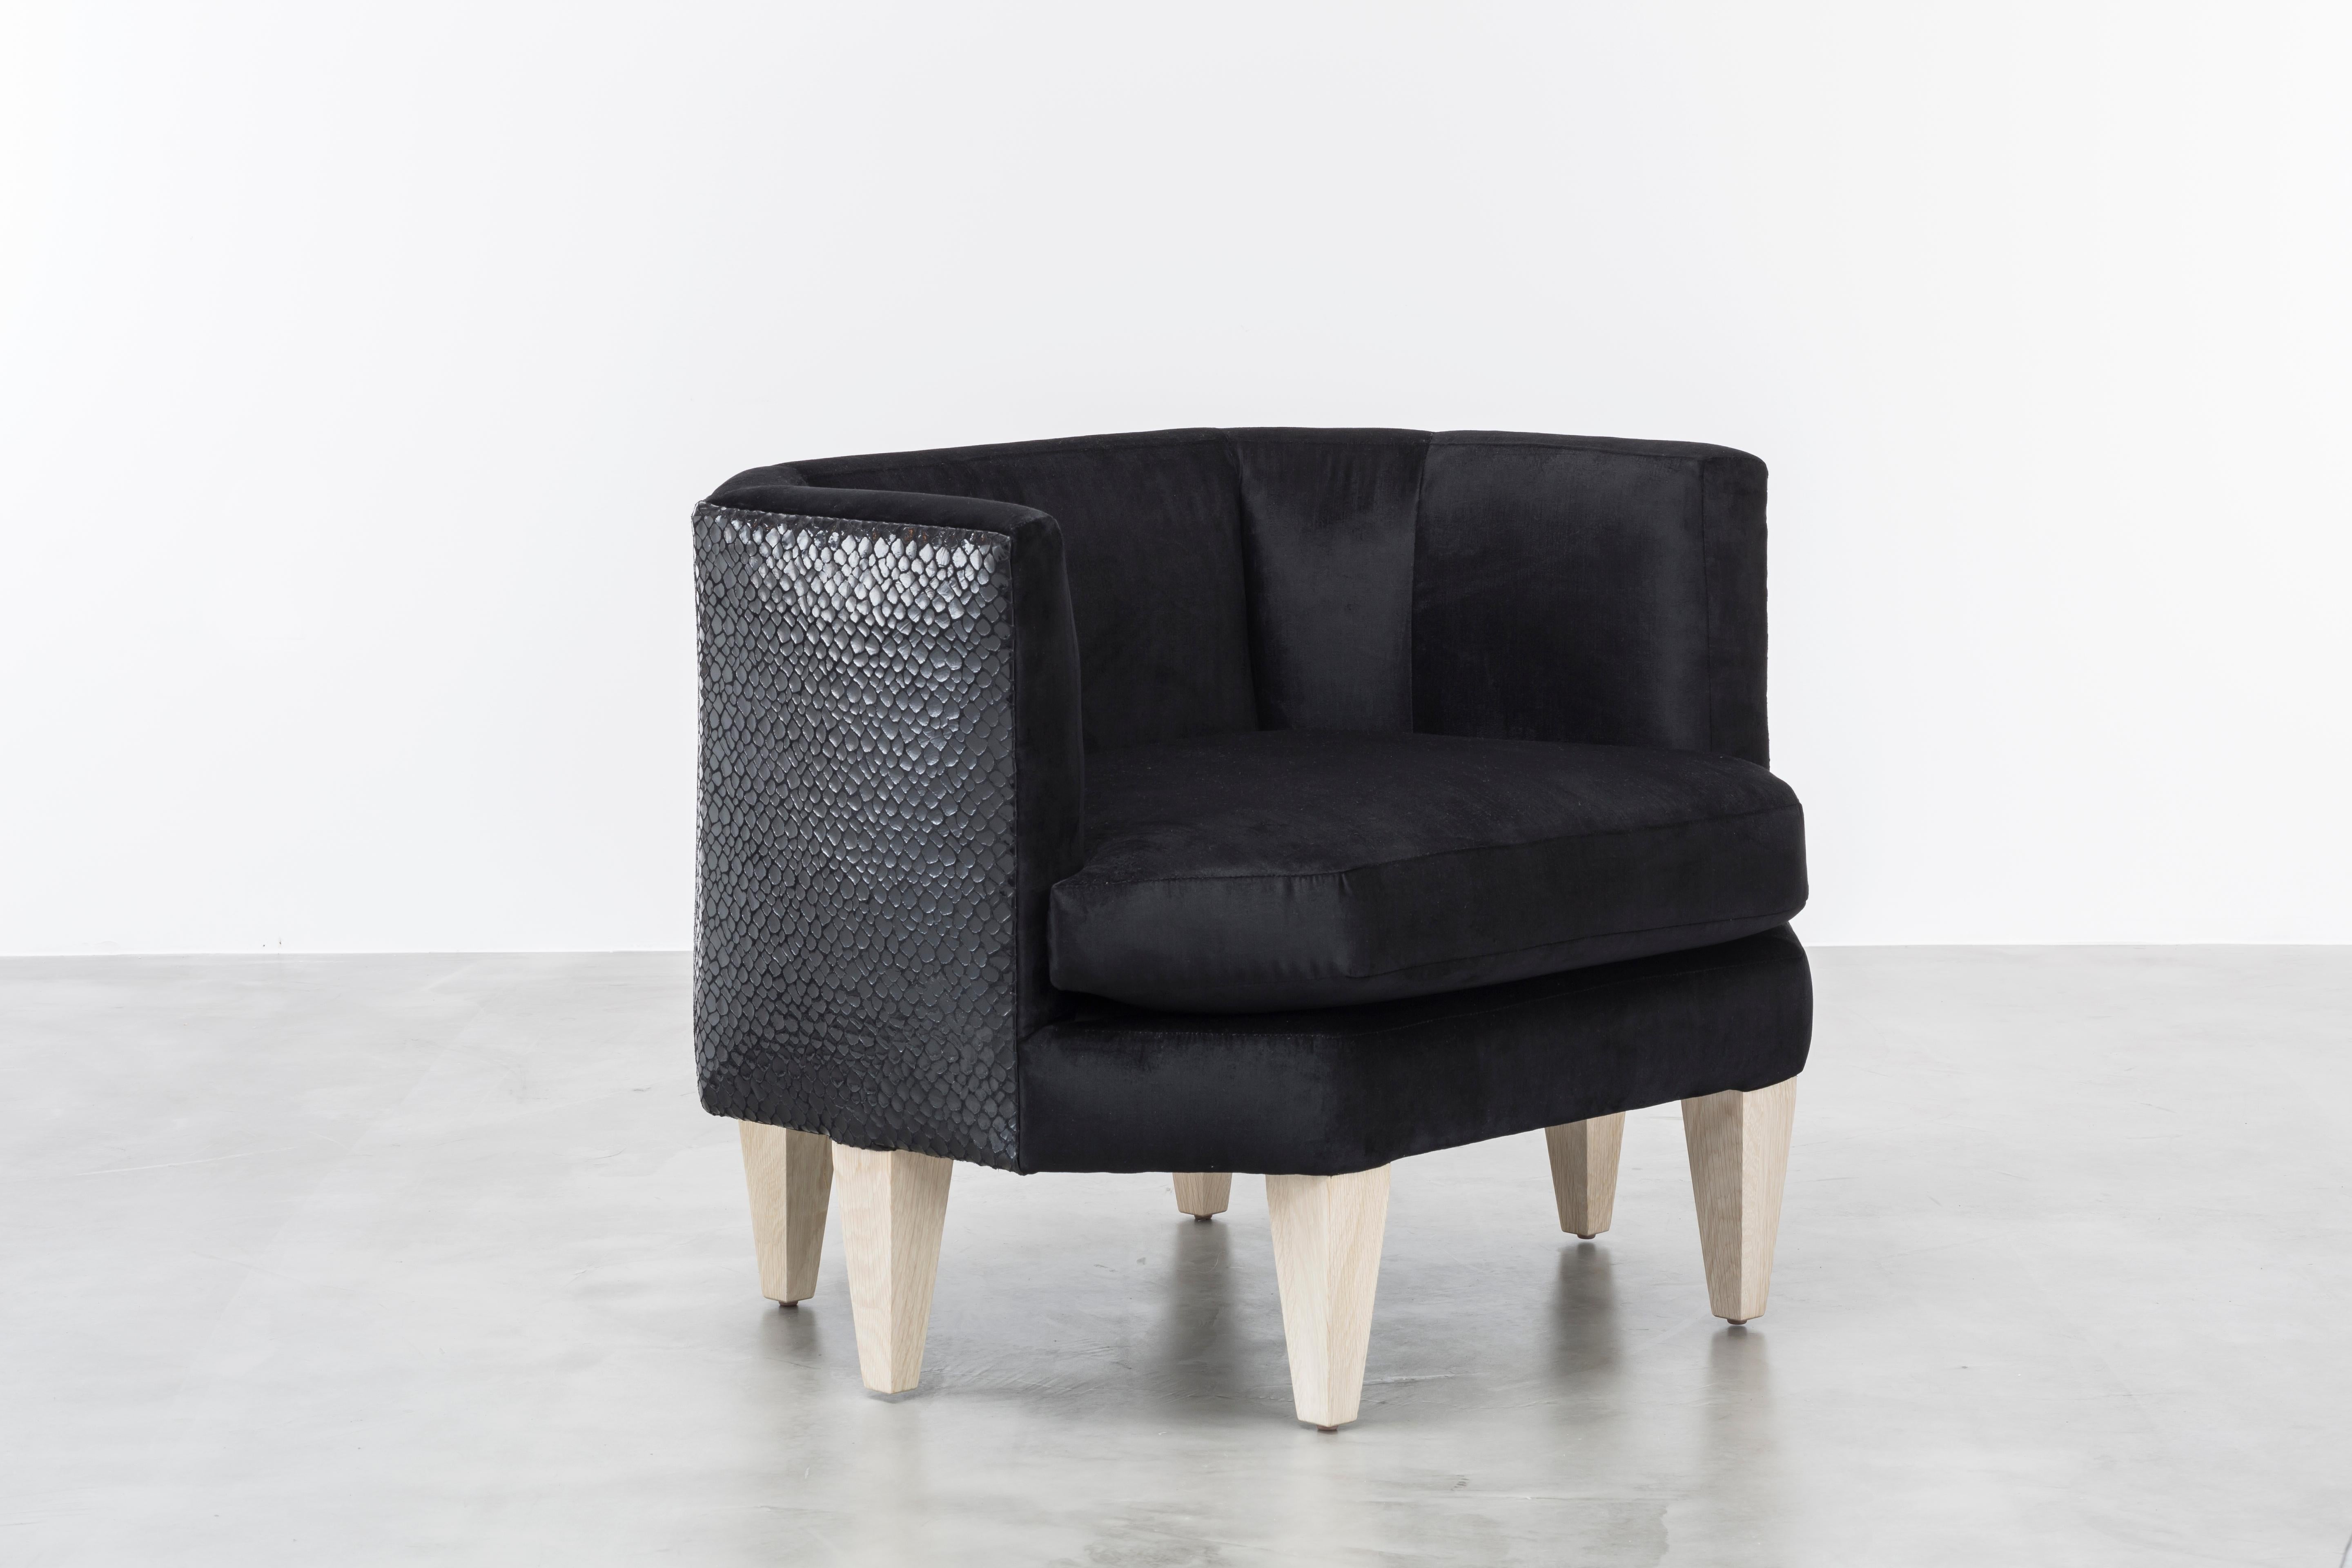 The Odette chair features an octagonal shaped upholstered seat and back with contrast crocodile leather back panels floating upon six wood legs. Fully custom and made to order in California. As shown in Glam Velvet black and contrast crocodile